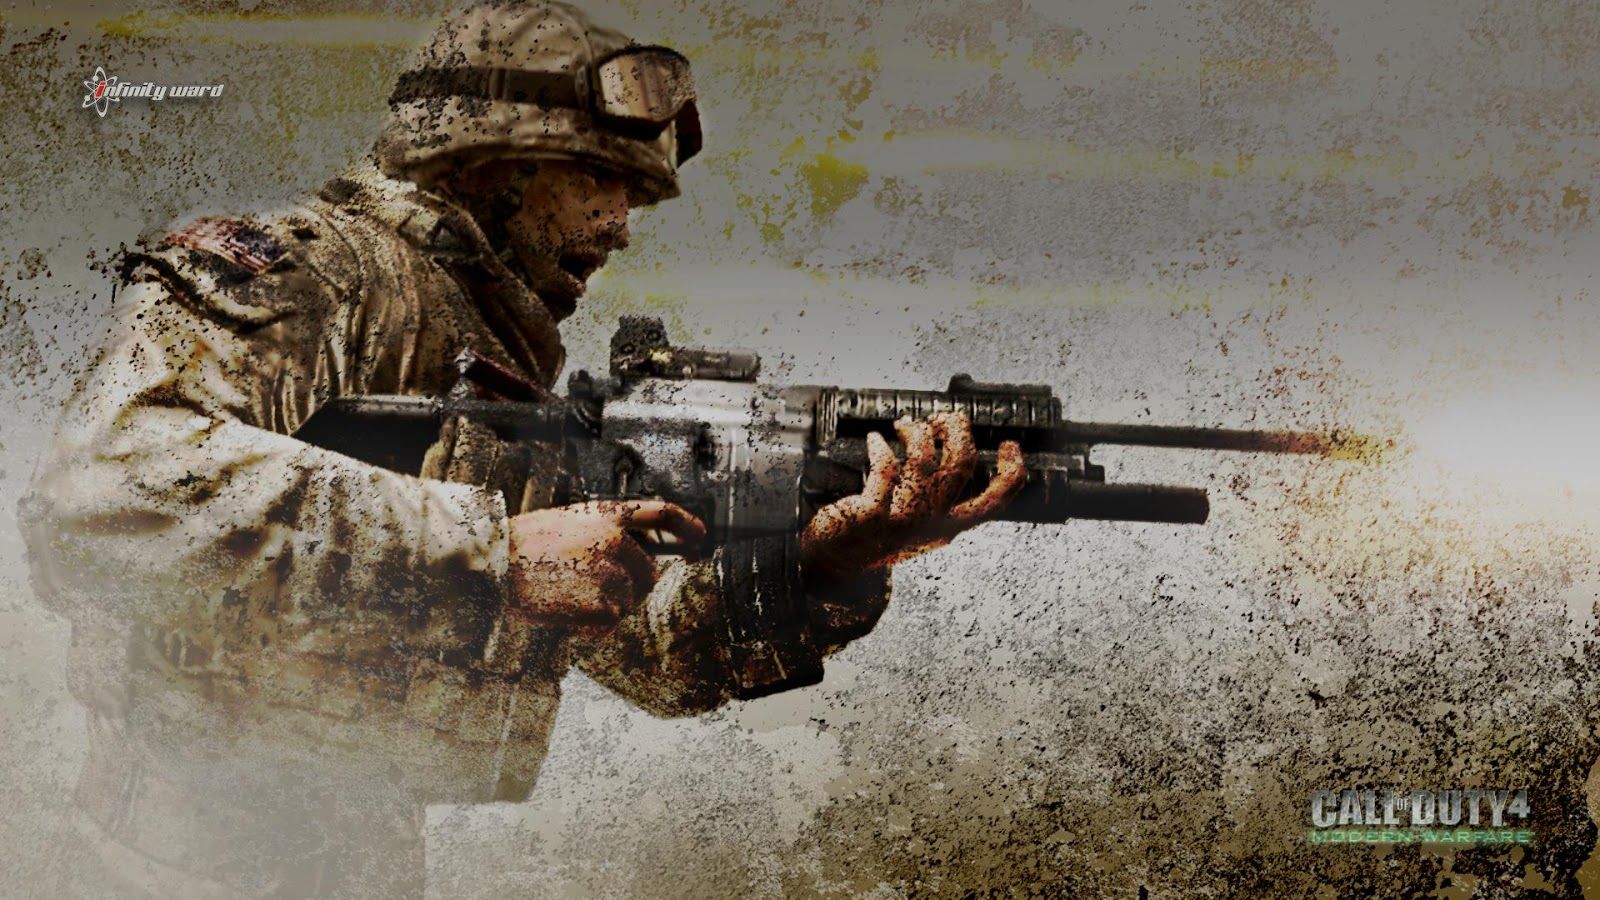 Call Of Duty Game Wallpapers HD | Wallpapersforfree